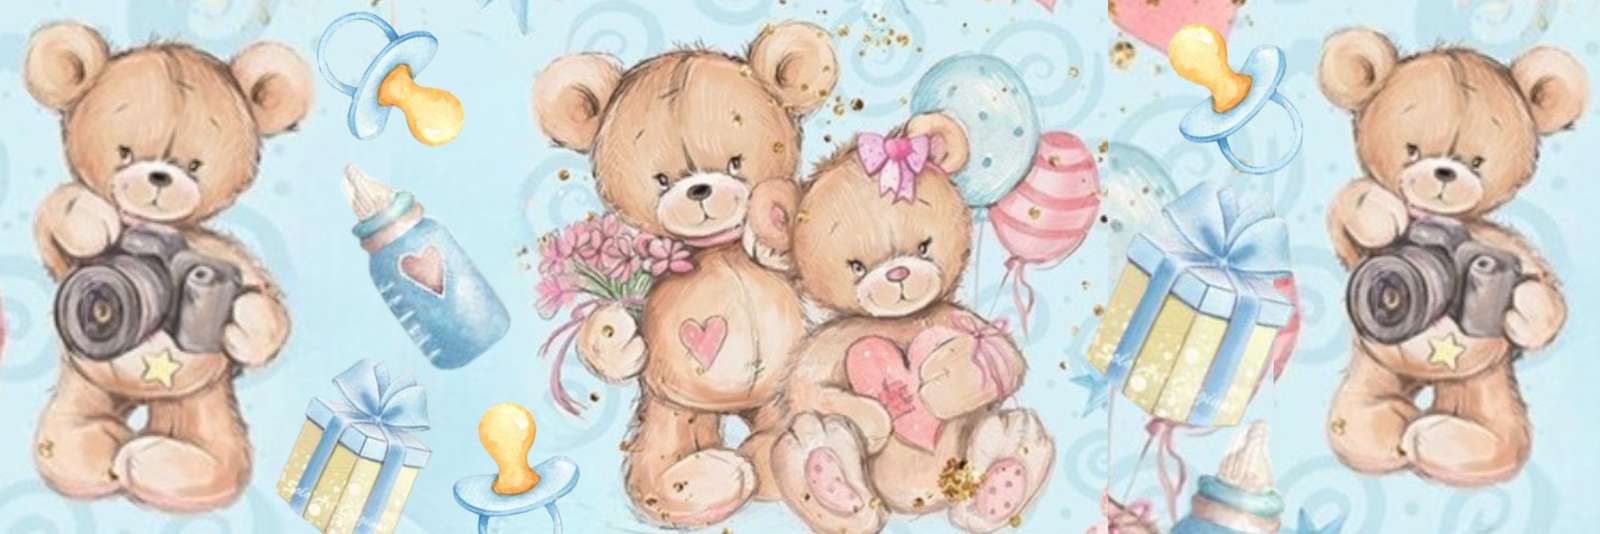 Teddy bear puzzles online puzzle